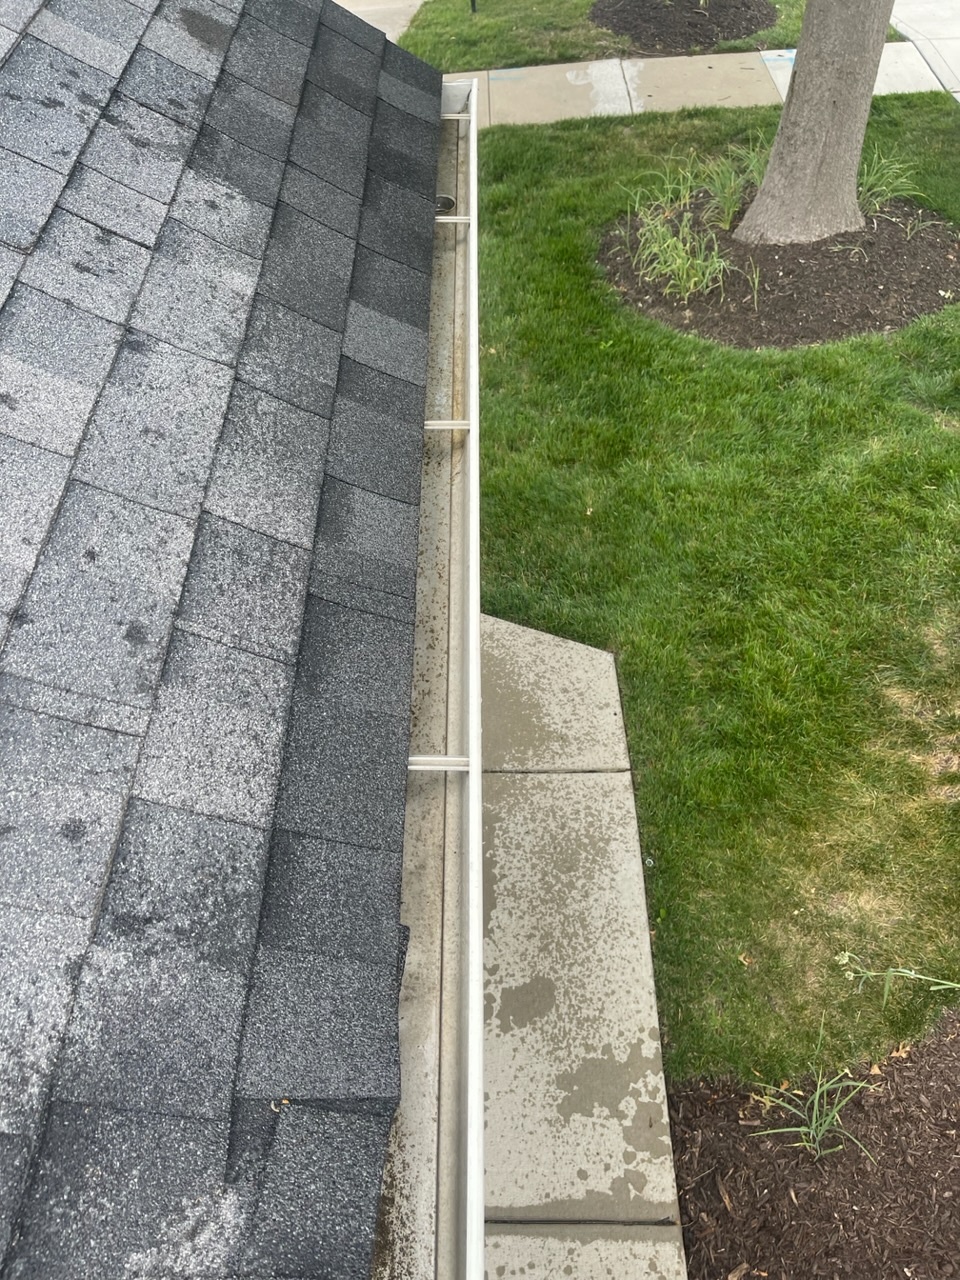 Gutter Cleaning Service in Toms River for Doris home